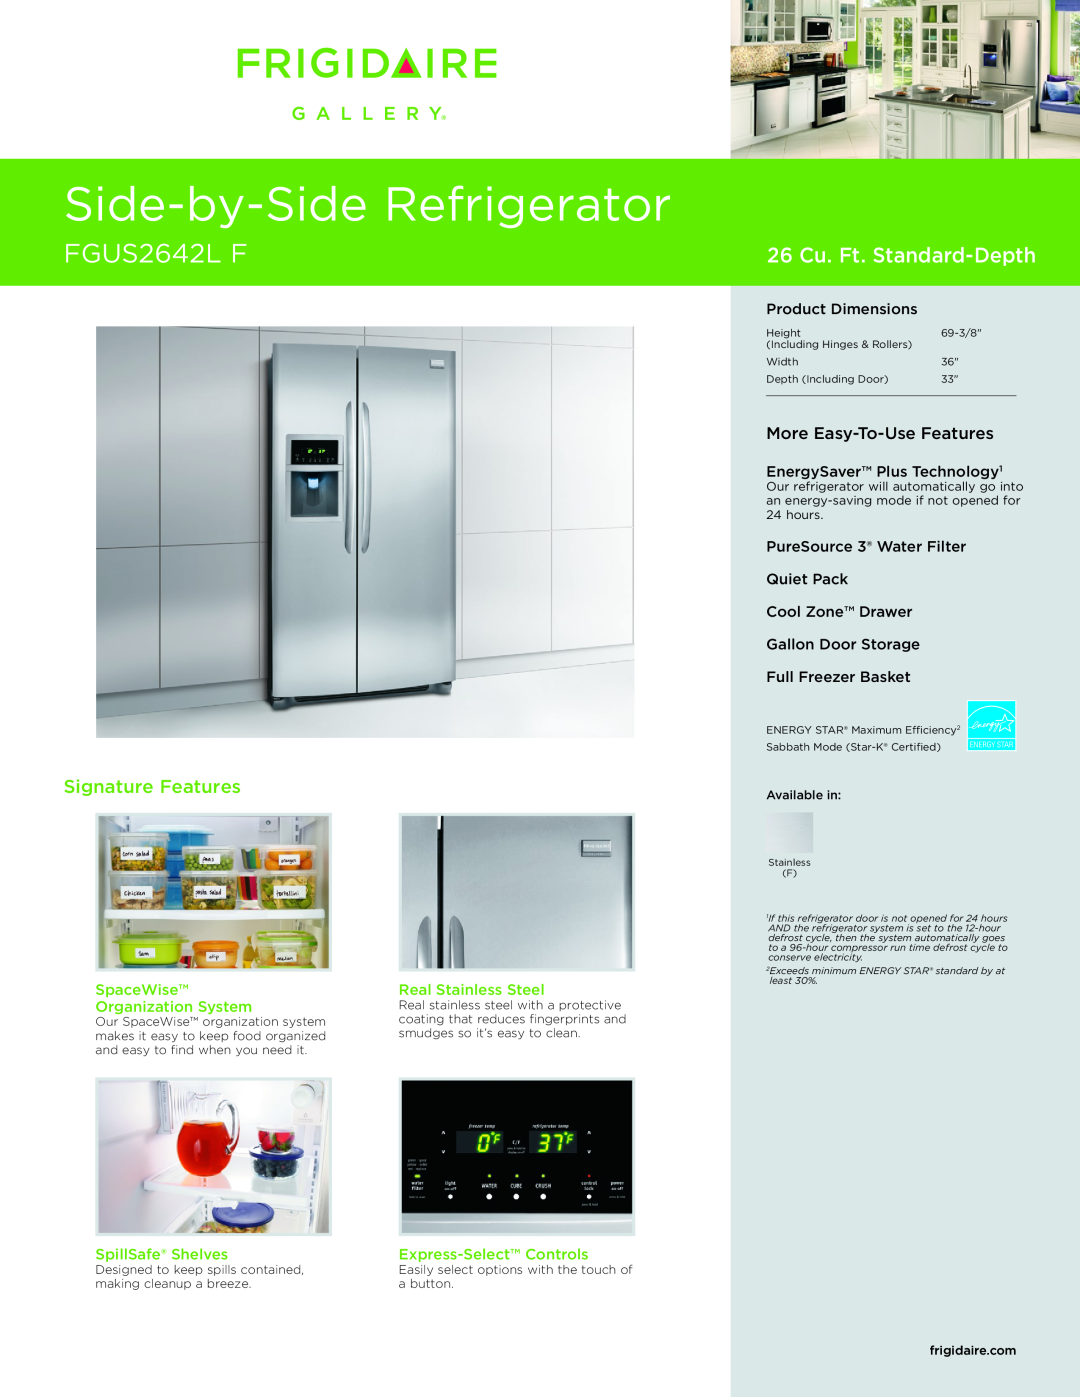 Frigidaire FGUS2642L F dimensions Side-by-SideRefrigerator, 26 Cu. Ft. Standard-Depth, Signature Features, SpaceWise 